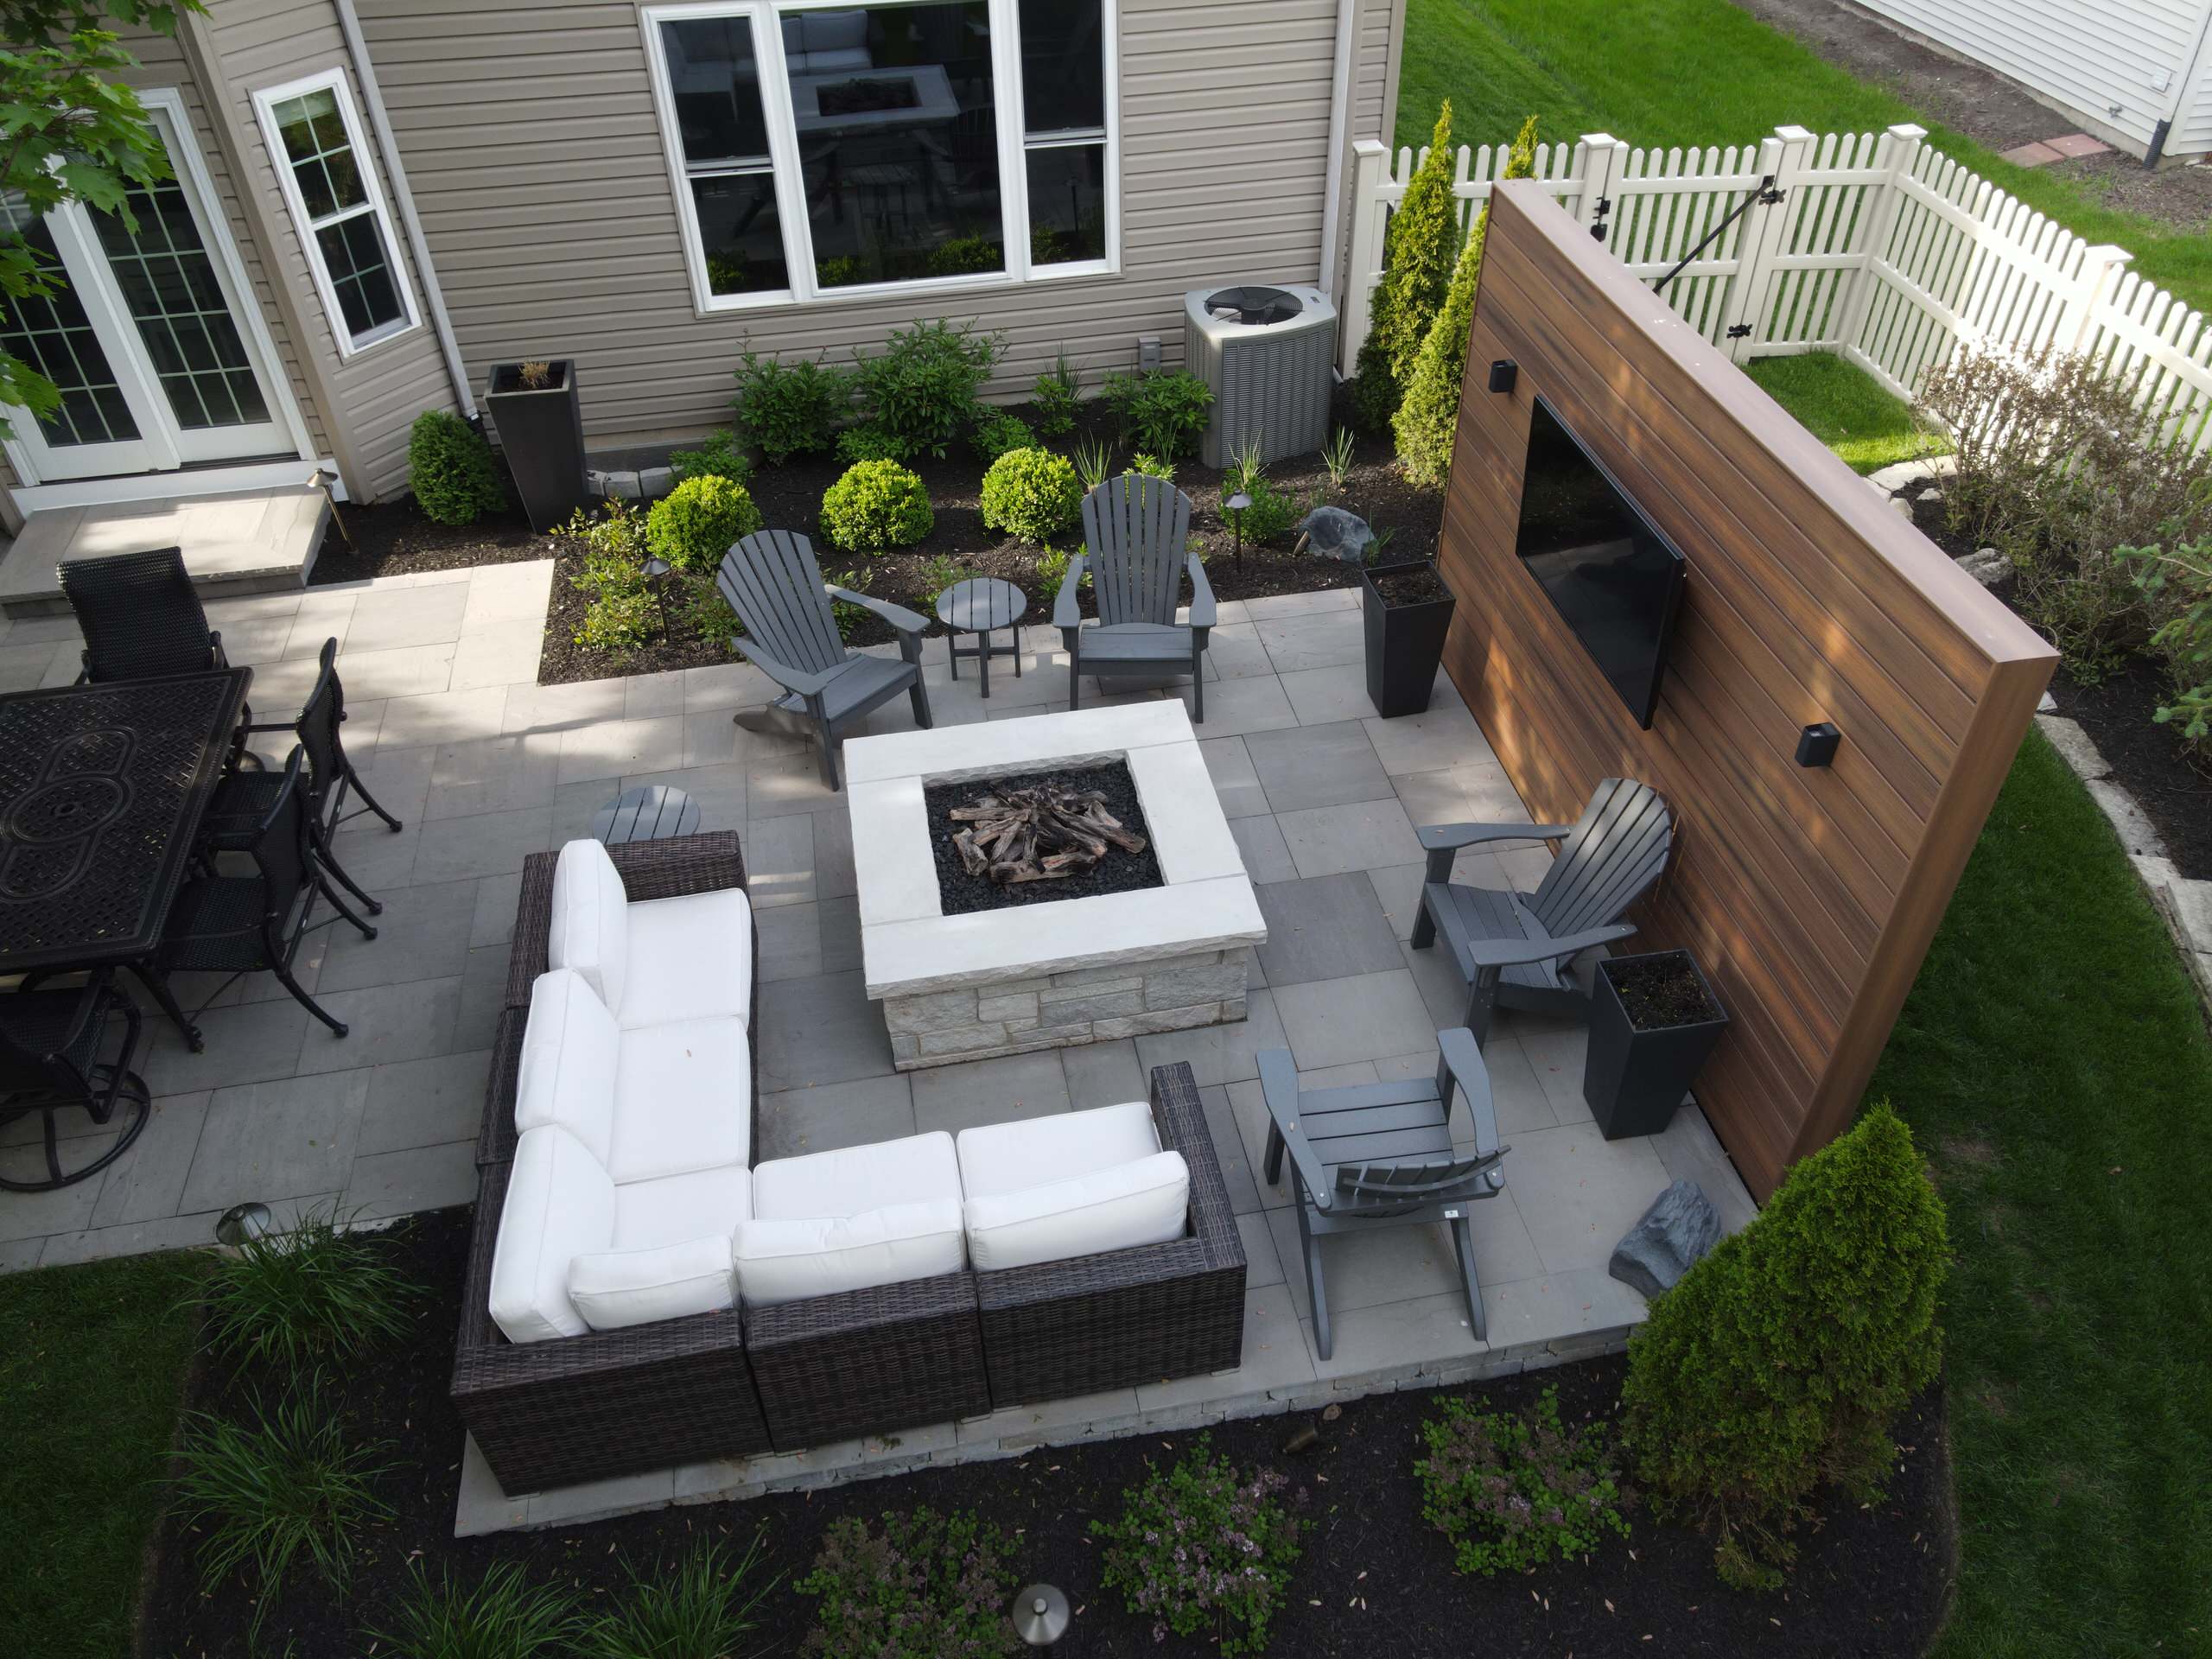 Outdoor Great Room featuring TV & Gas Fire Pit